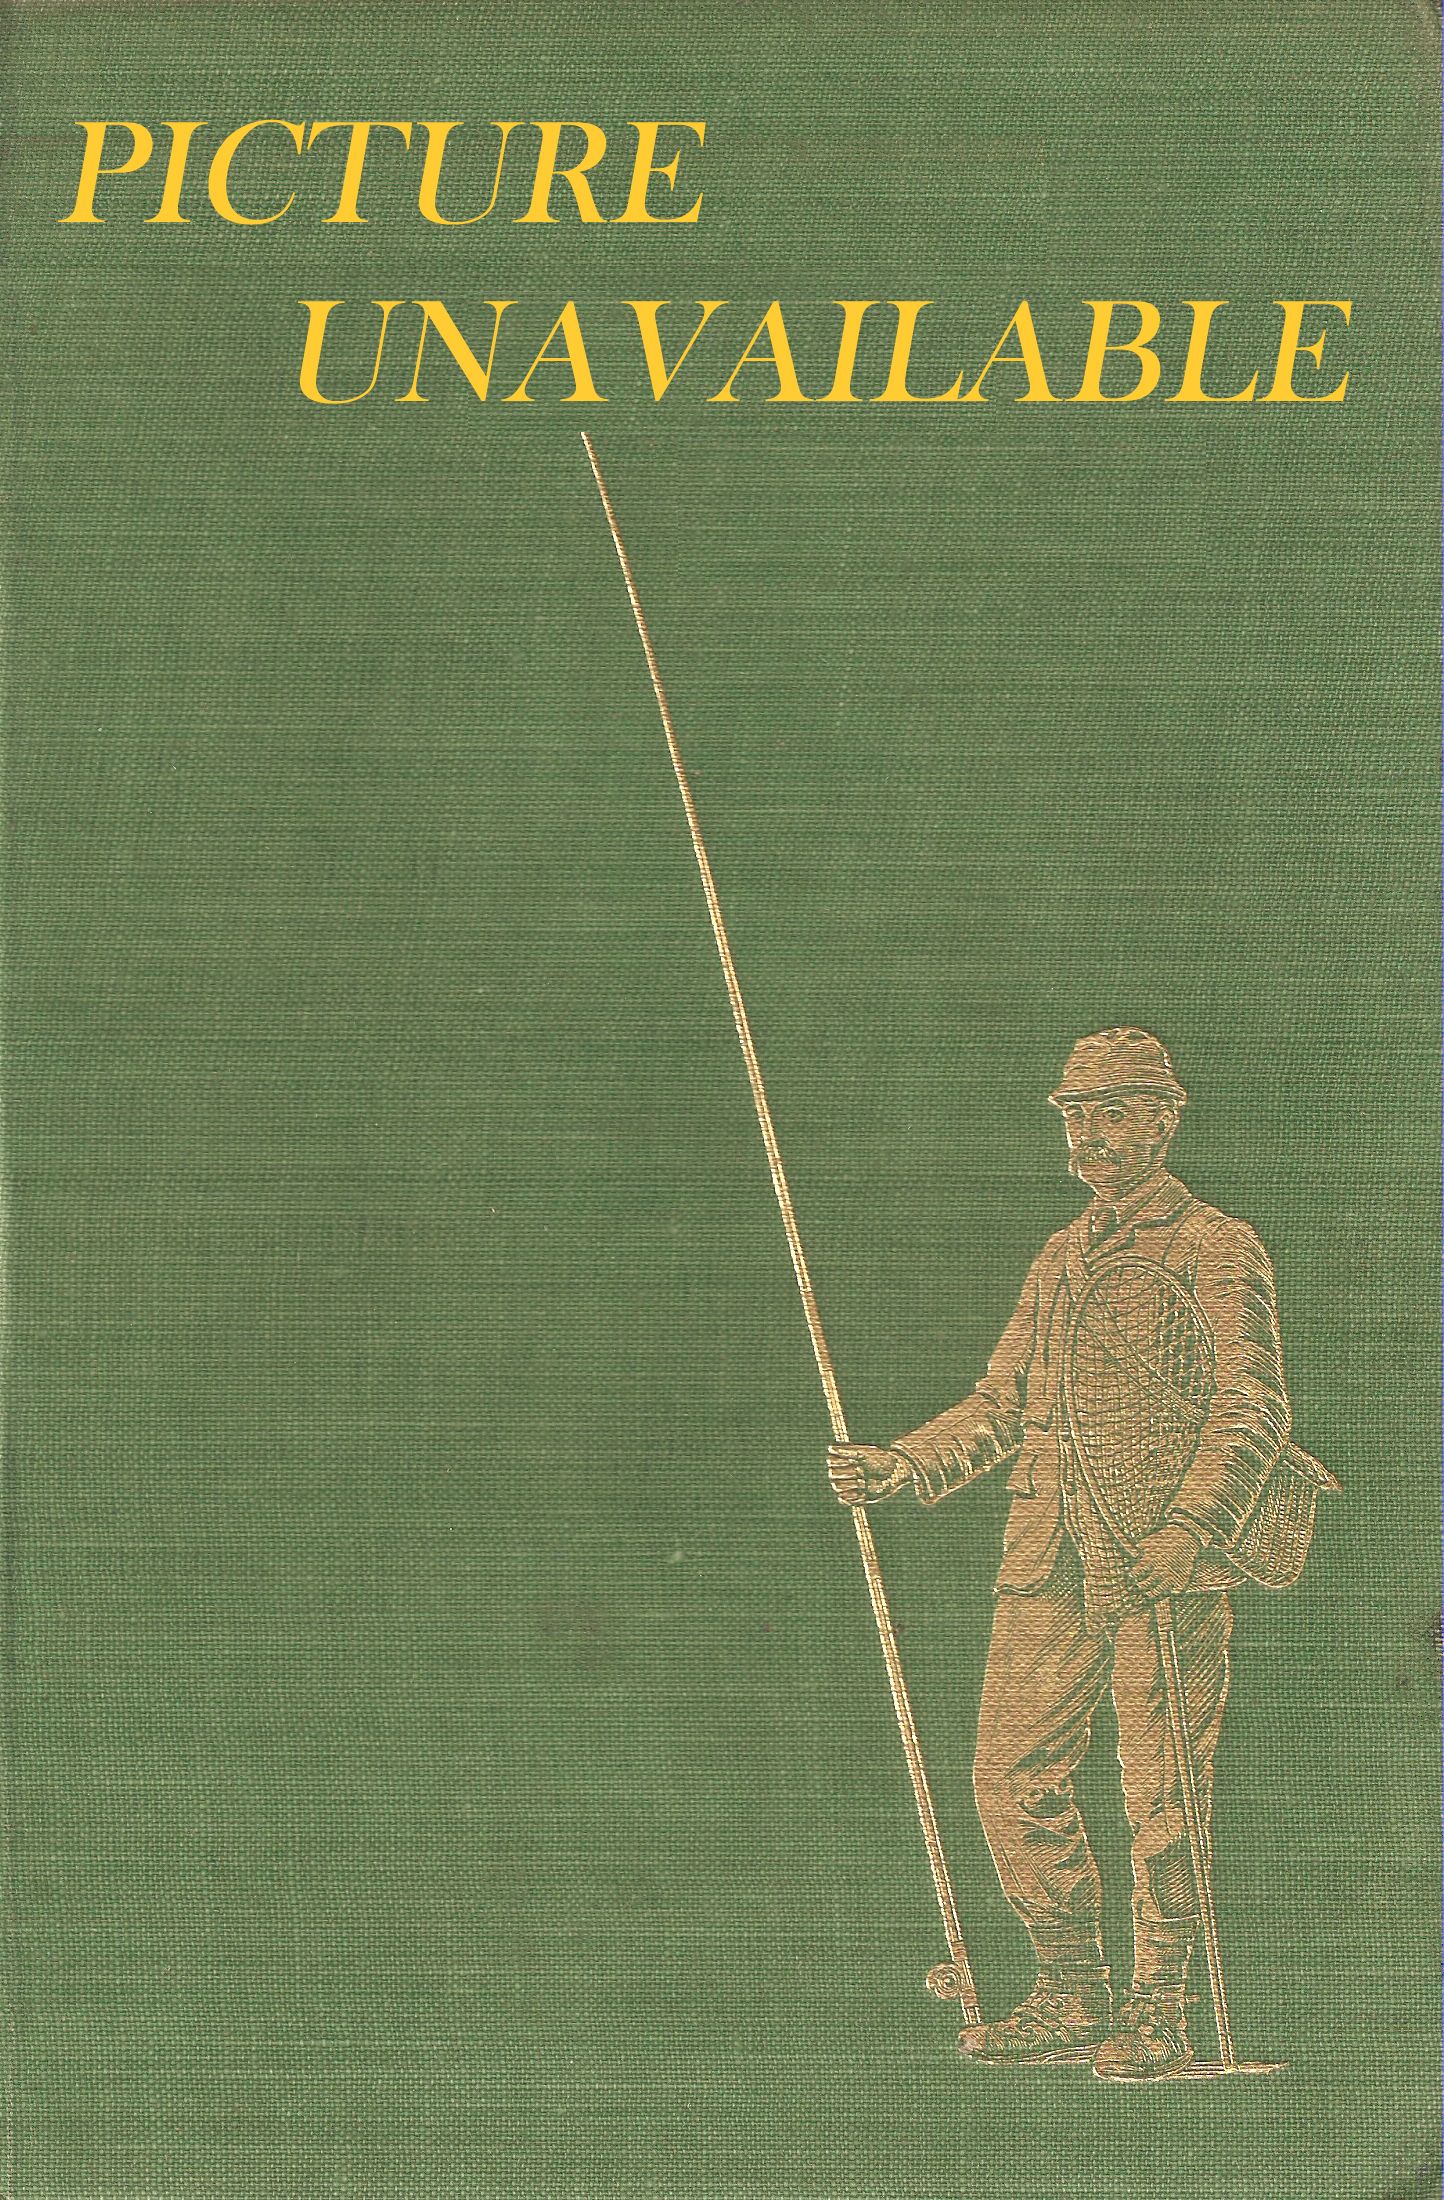 THE MAJOR GOES FISHING: A Fantasy of the Chalk-Stream. By Major-General  Geoffrey Brooke. C.B., D.S.O., M.C.